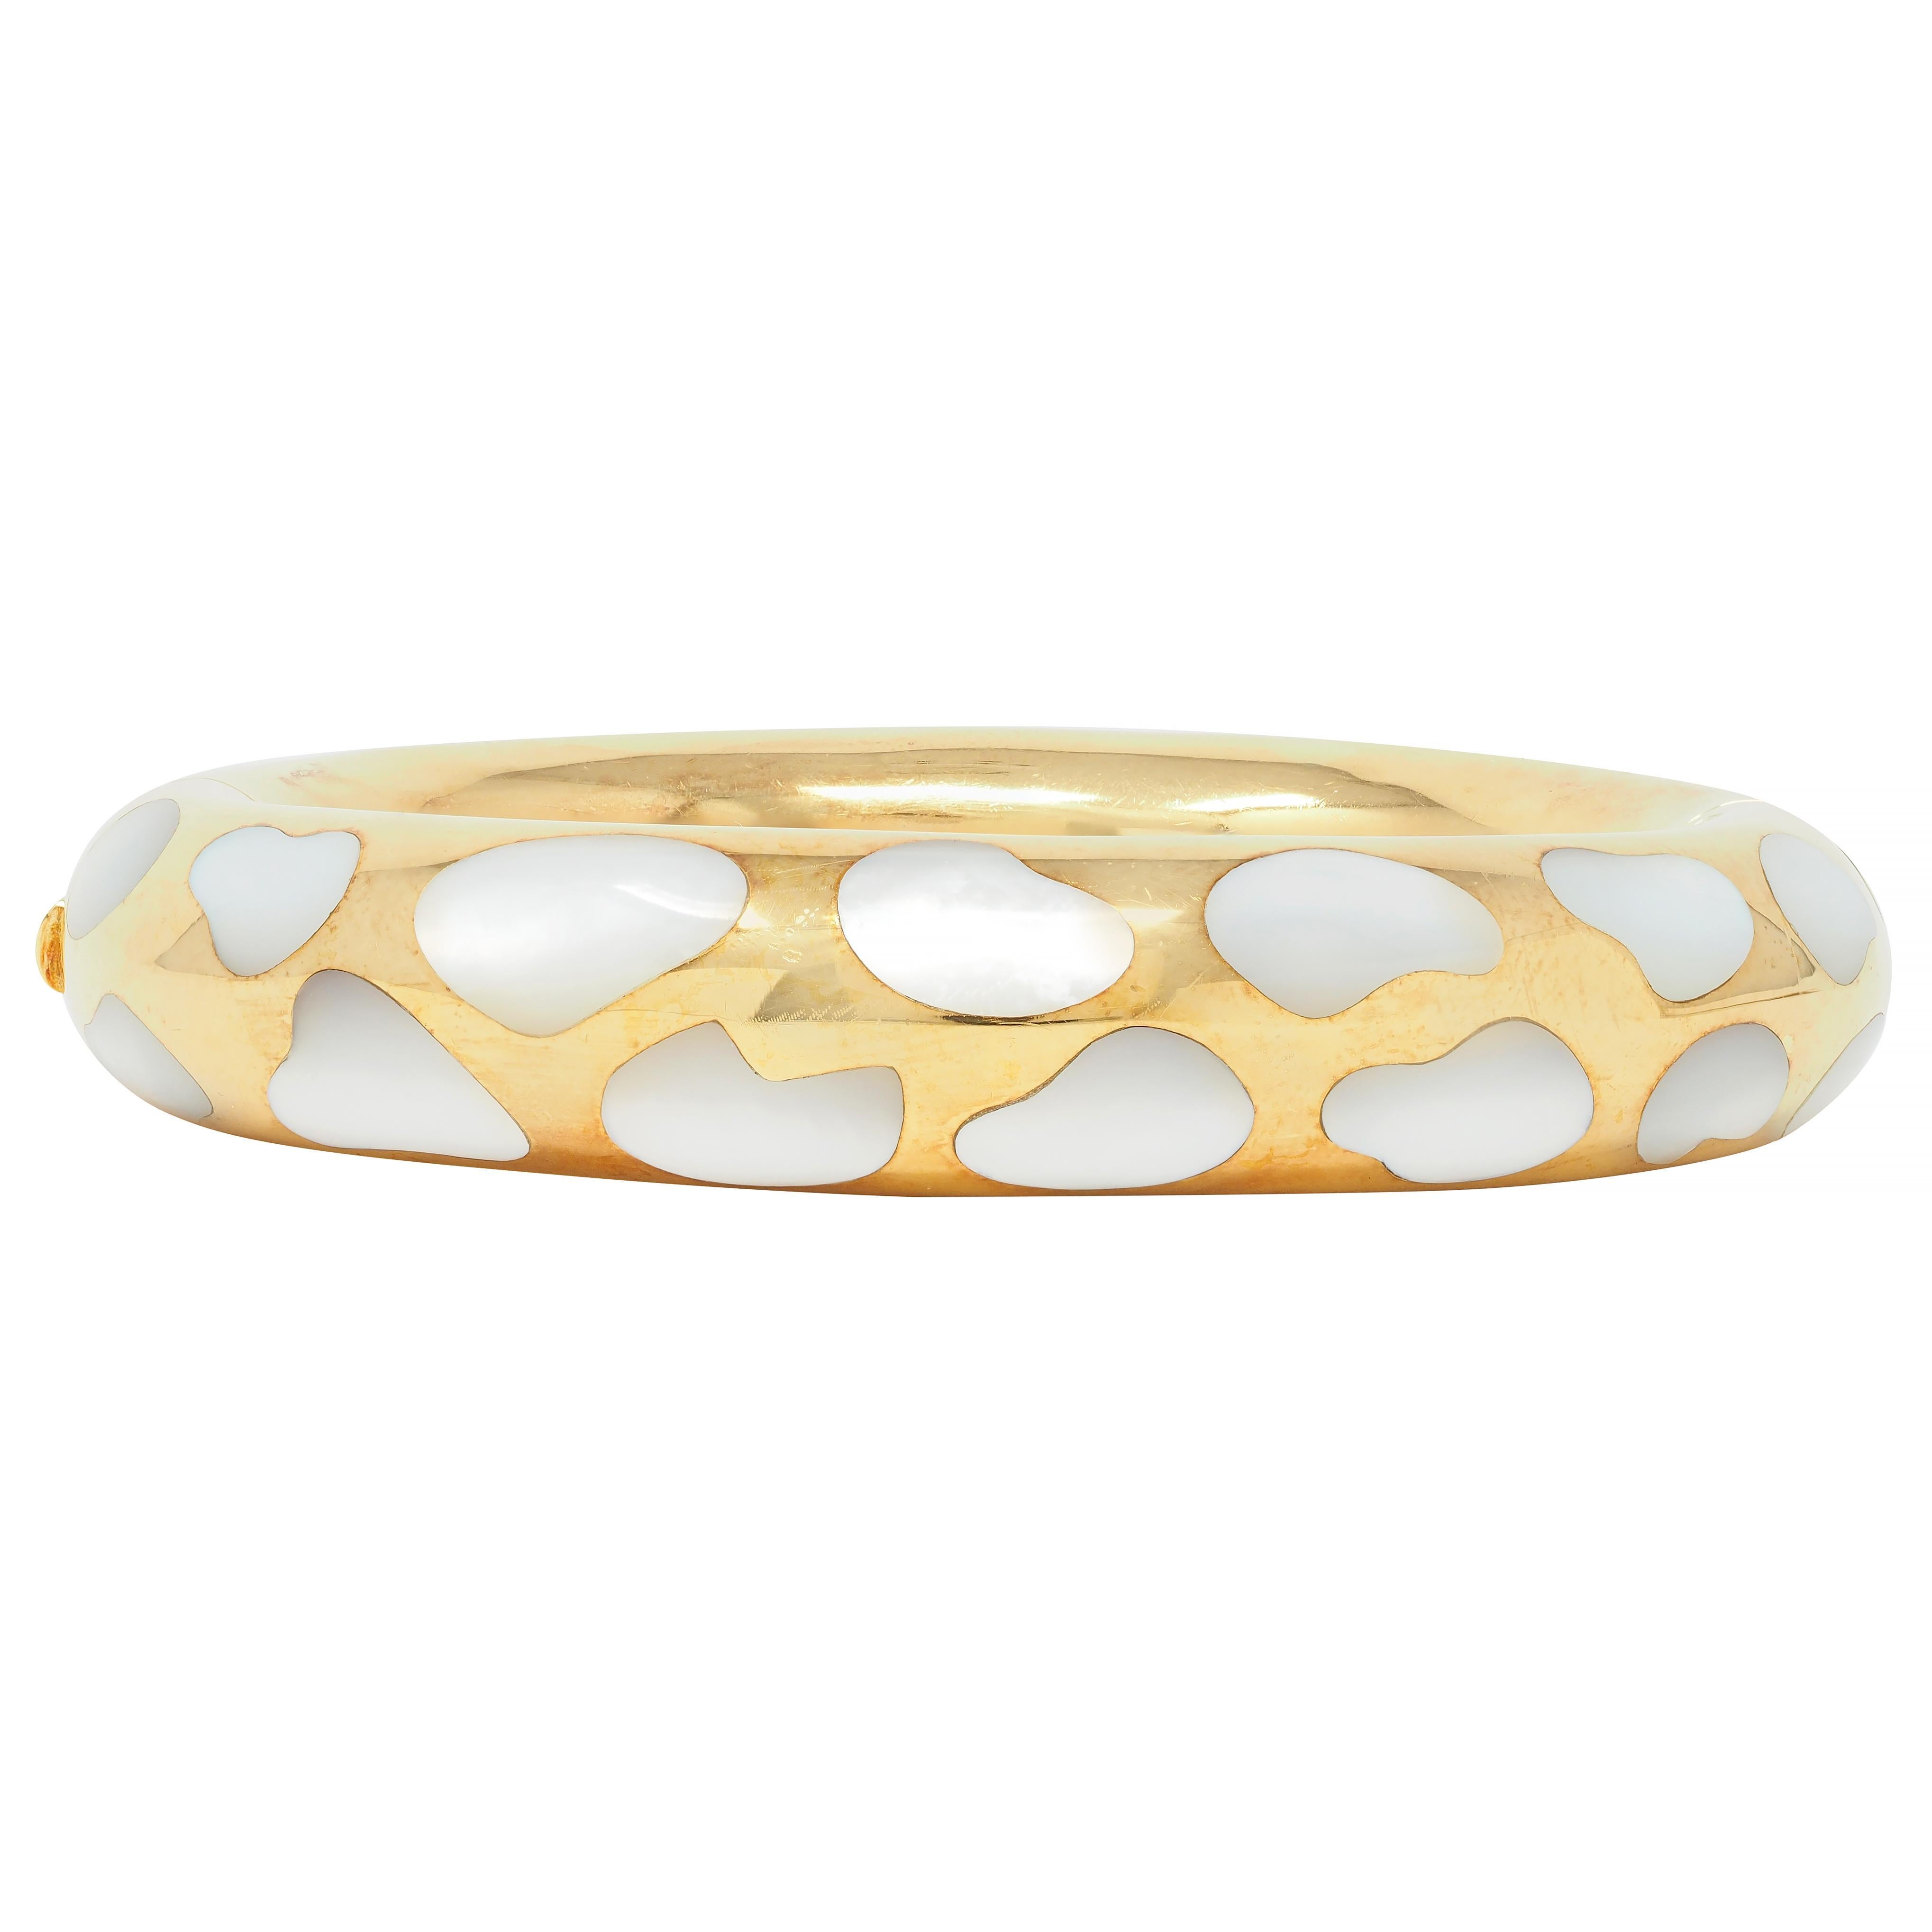 Designed as a rounded yellow gold bangle inlaid with mother-of-pearl
Organically shaped and ranging in size 
White with strong iridescence 
With high polish finish
Opens on a hinge via press release clasp 
Stamped for 18 karat gold
Fully signed for